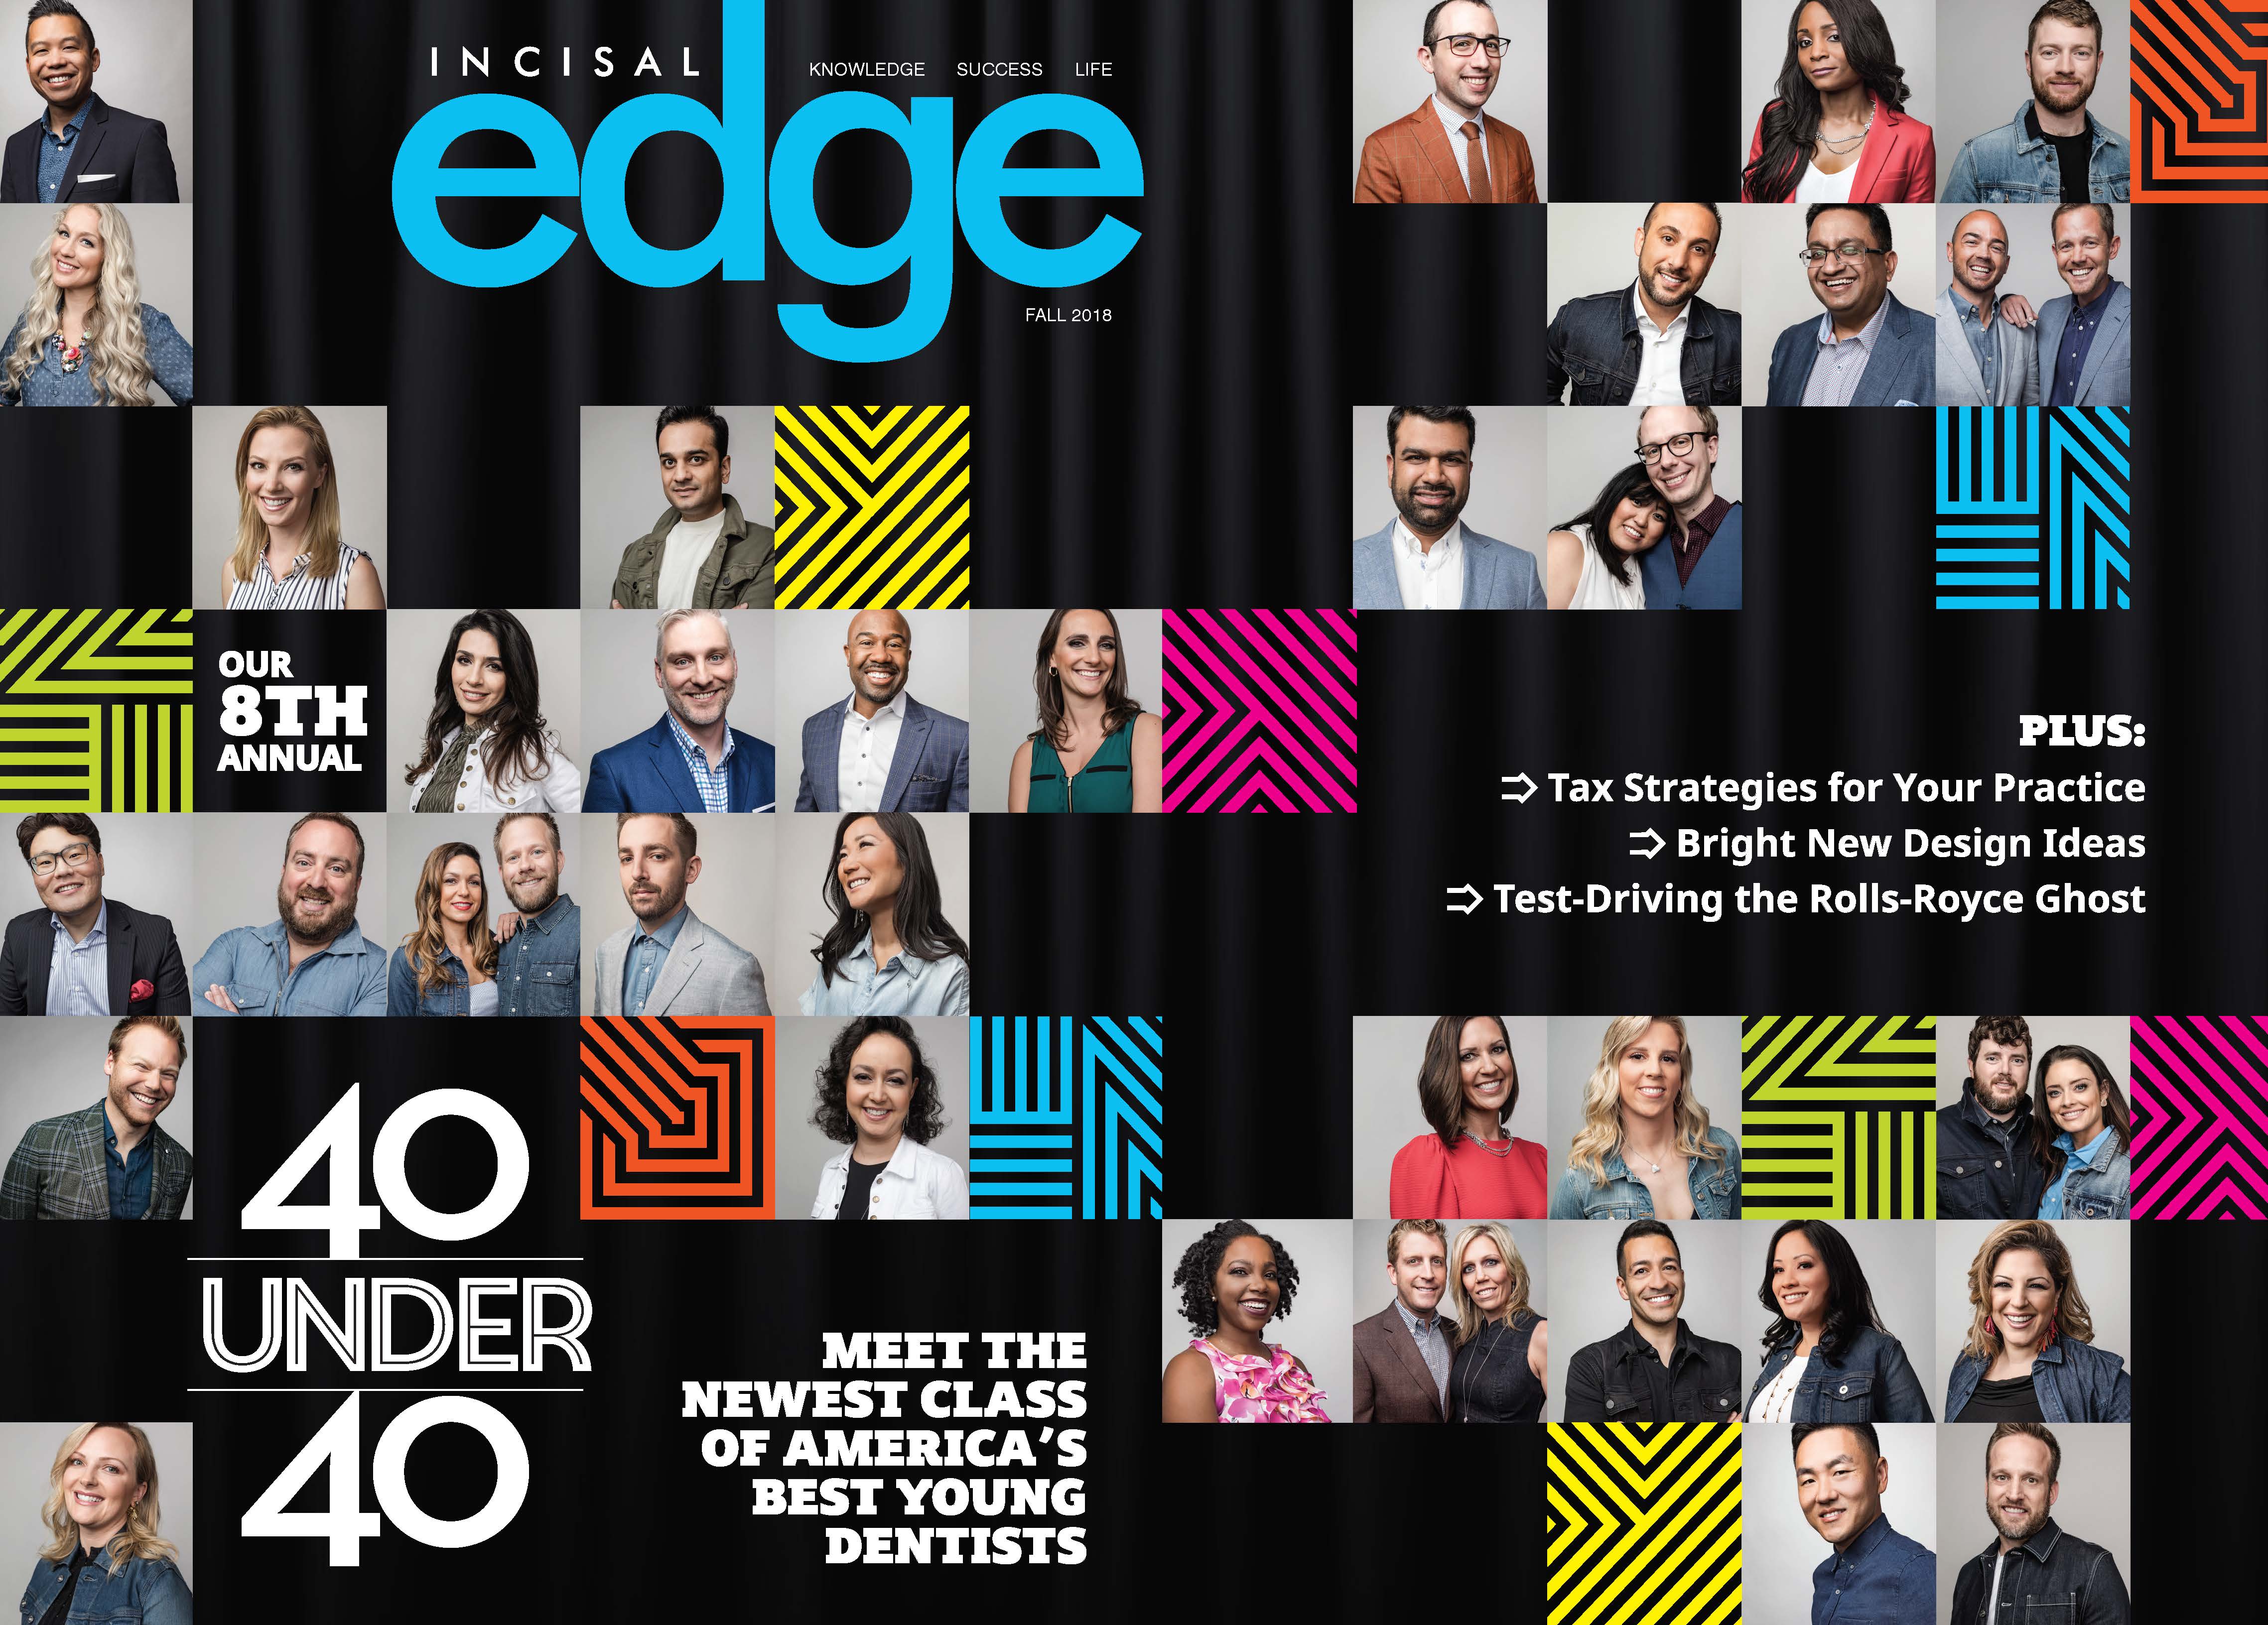 Published by Benco Dental since 1997, Incisal Edge, the leading lifestyle magazine for dental professionals nationwide, celebrates dentists’ achievements both inside the operatory and during their hard-earned downtime. Members of the 2018 40 Under 40 are shown on the cover of the 2018 fall edition, photographed at the Kimpton Hotel Eventi, 851 Avenue of the Americas, New York, NY 10001. (Style Director Joseph DeAcetis/ Photography Sasha Maslov)